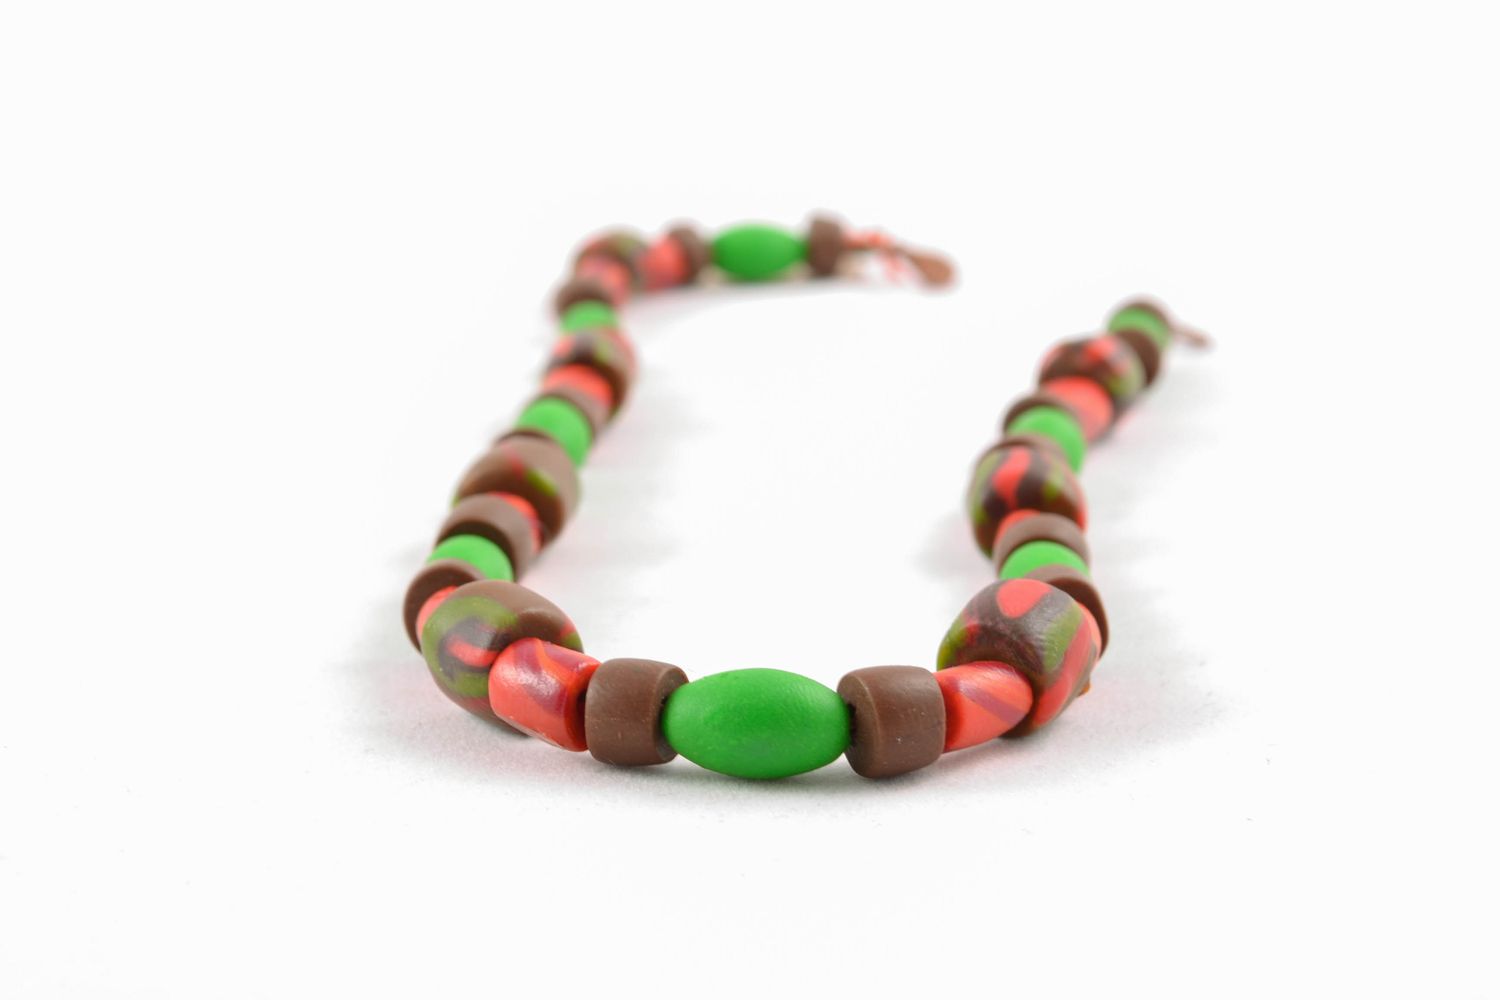 Clay beads necklace in light green, brown and red colors photo 4